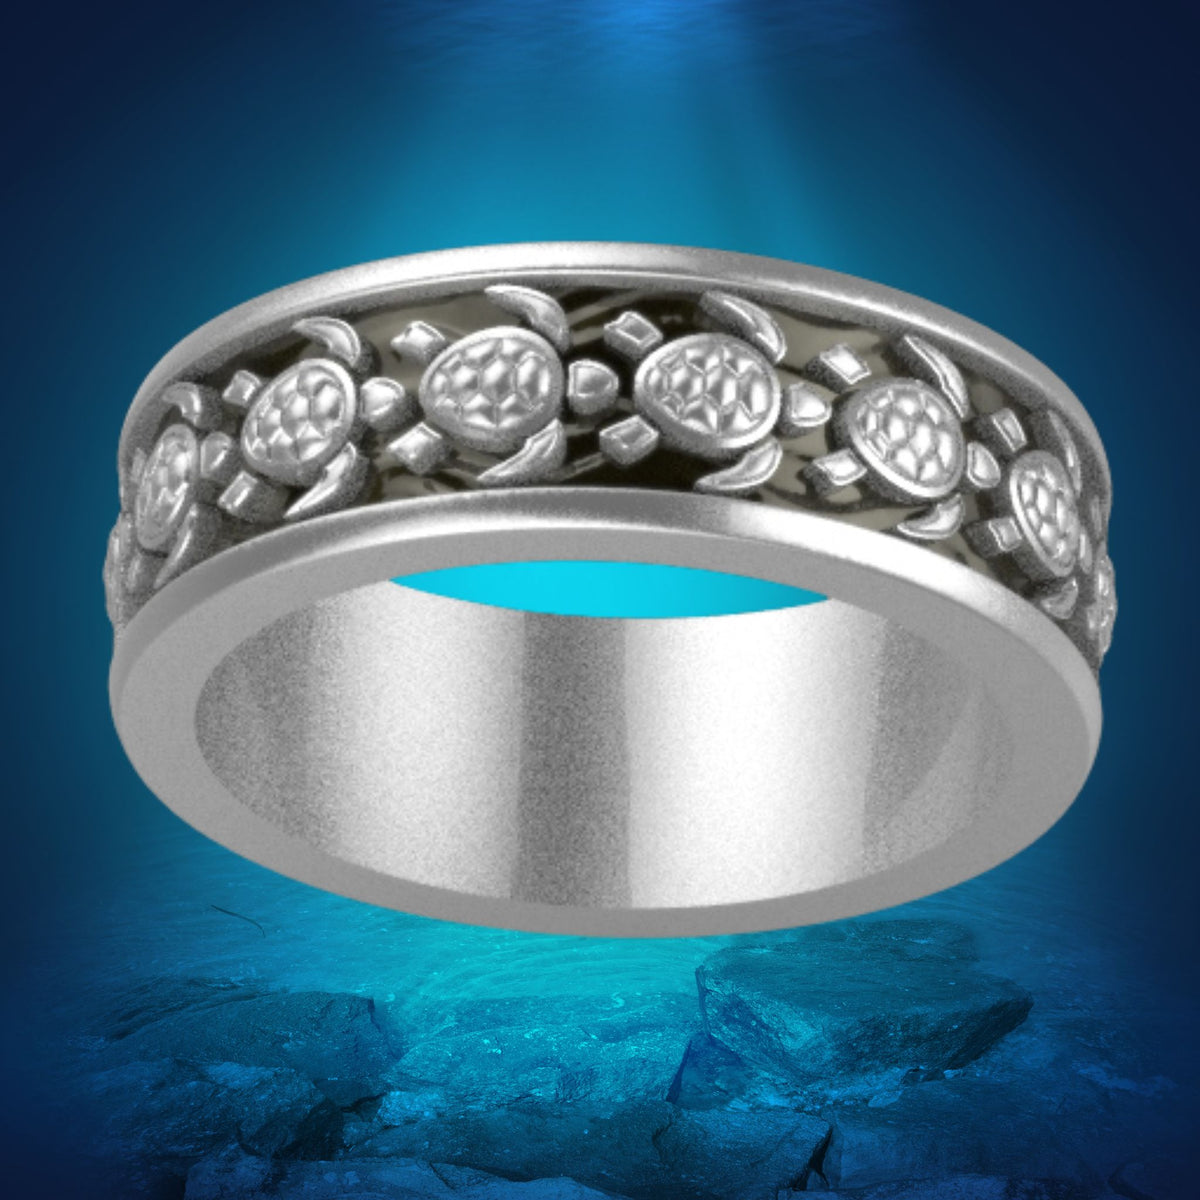 Tortuga Band Ring - Sea Turtle Swimming In Ocean in Sterling, Continuum or Sterling+10KT